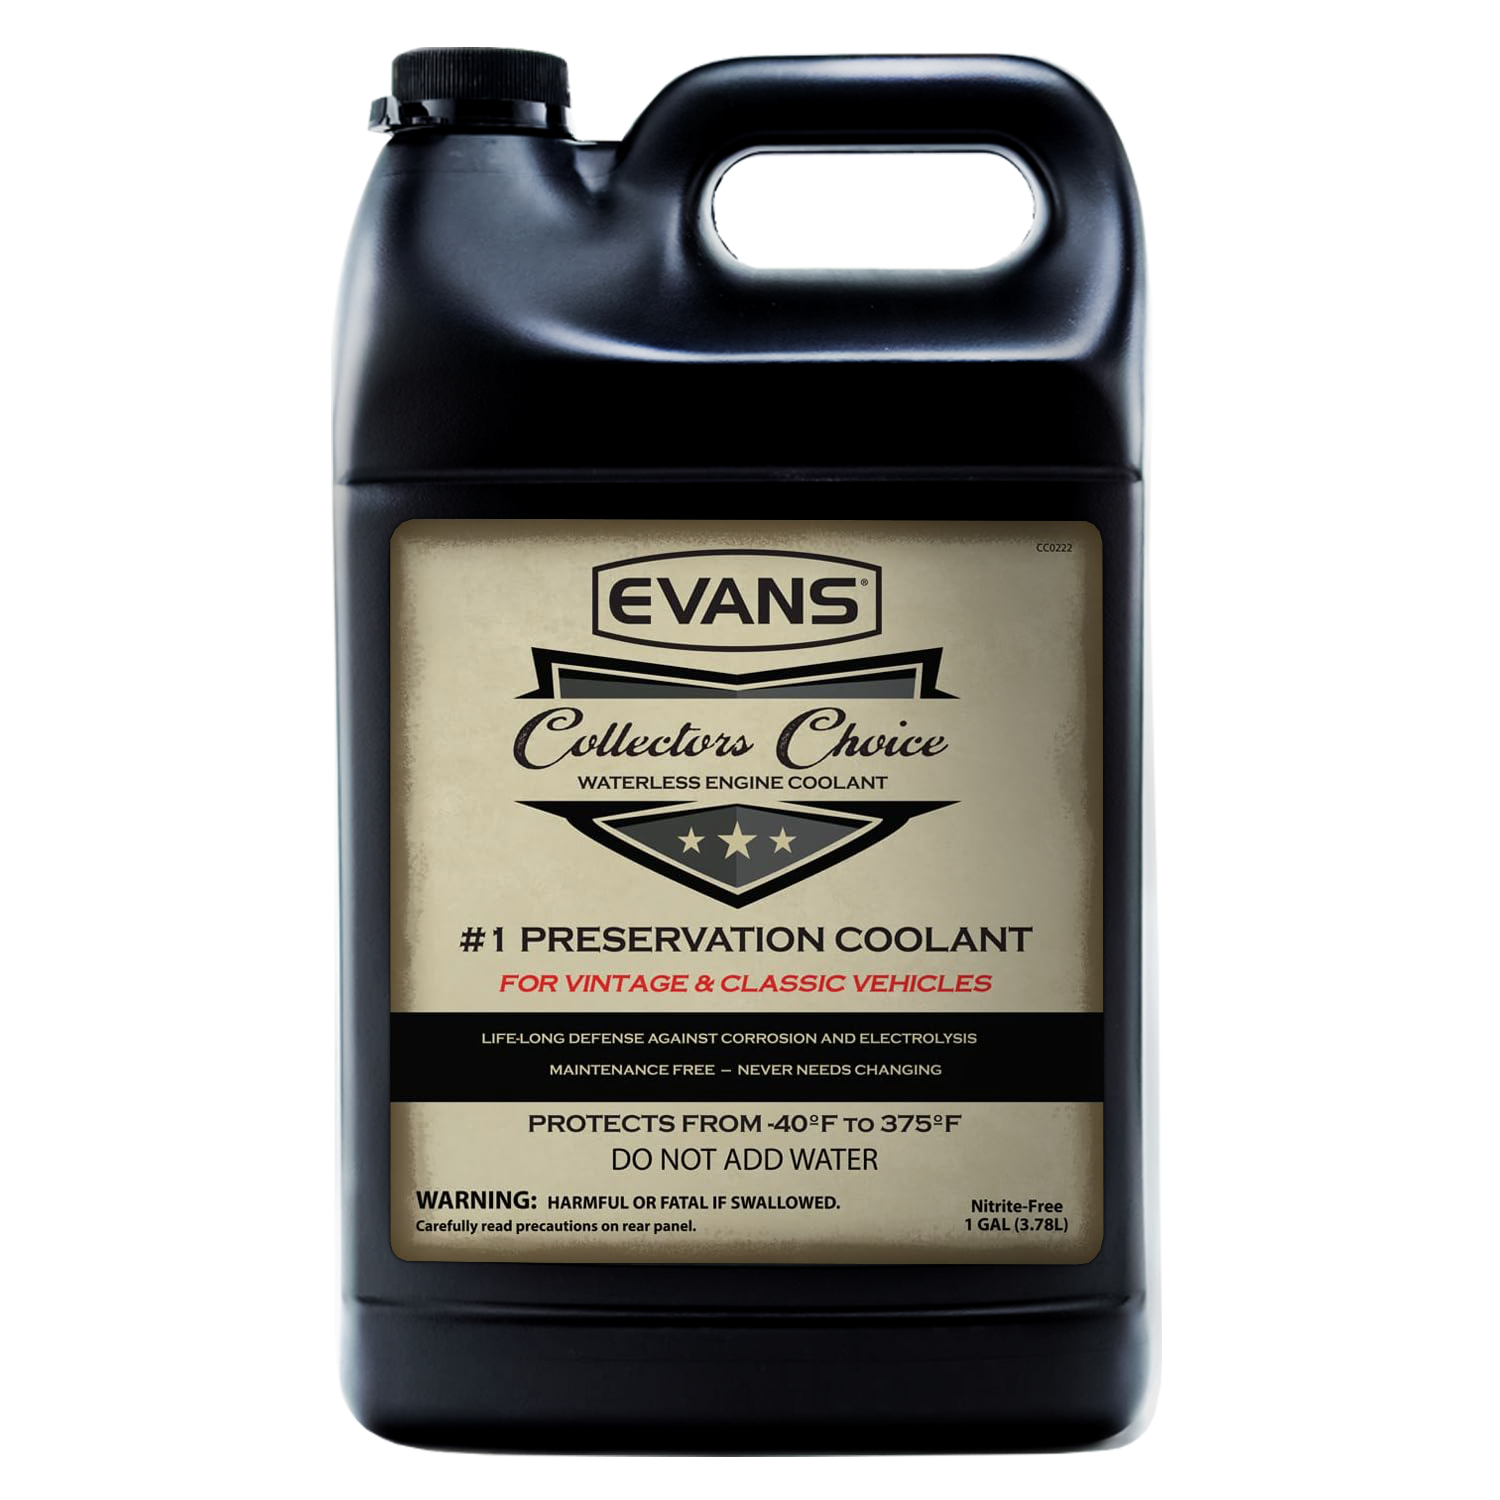 EVANS COLLECTORS CHOICE WATERLESS COOLANT